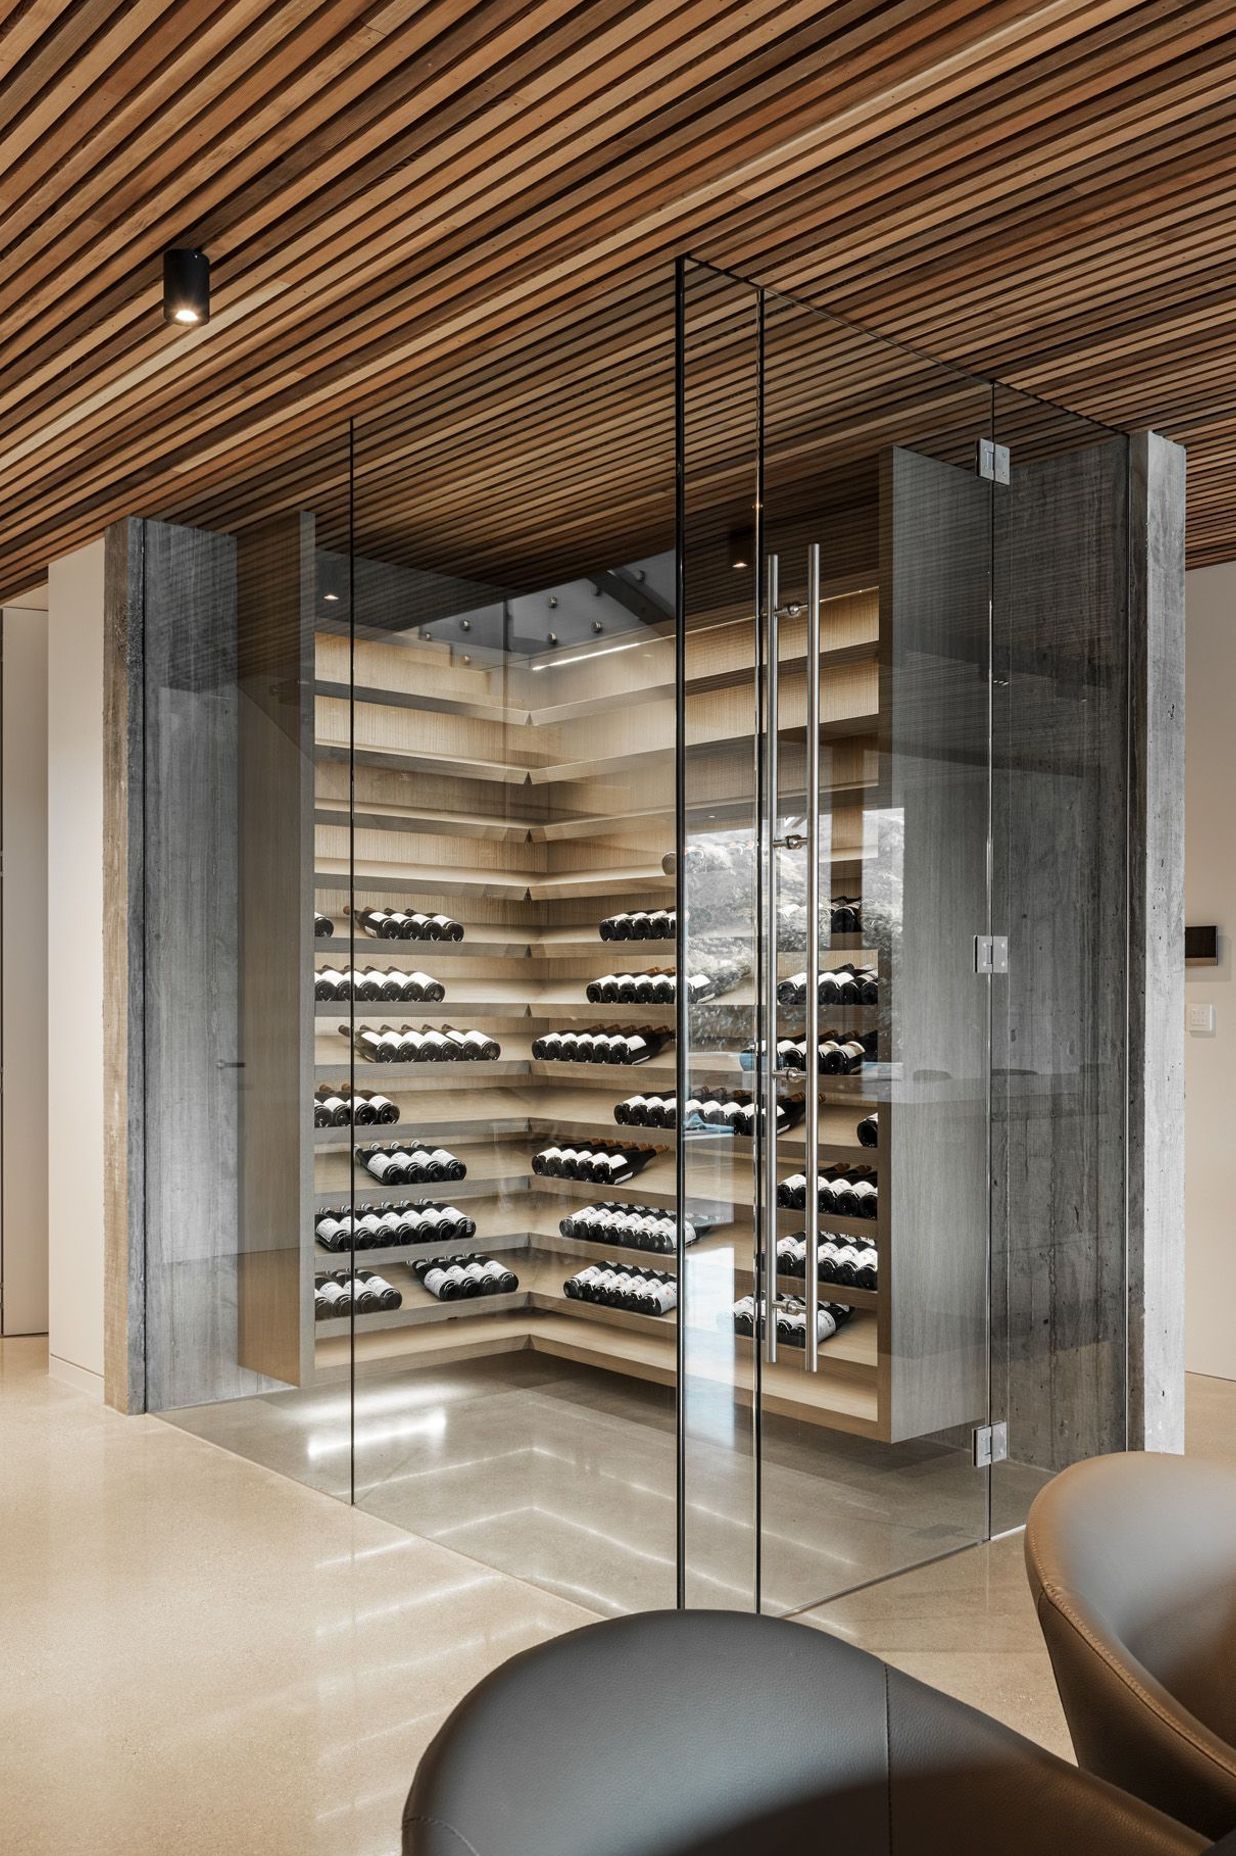 The wine cellar is a contemporary climatically controlled glass box.